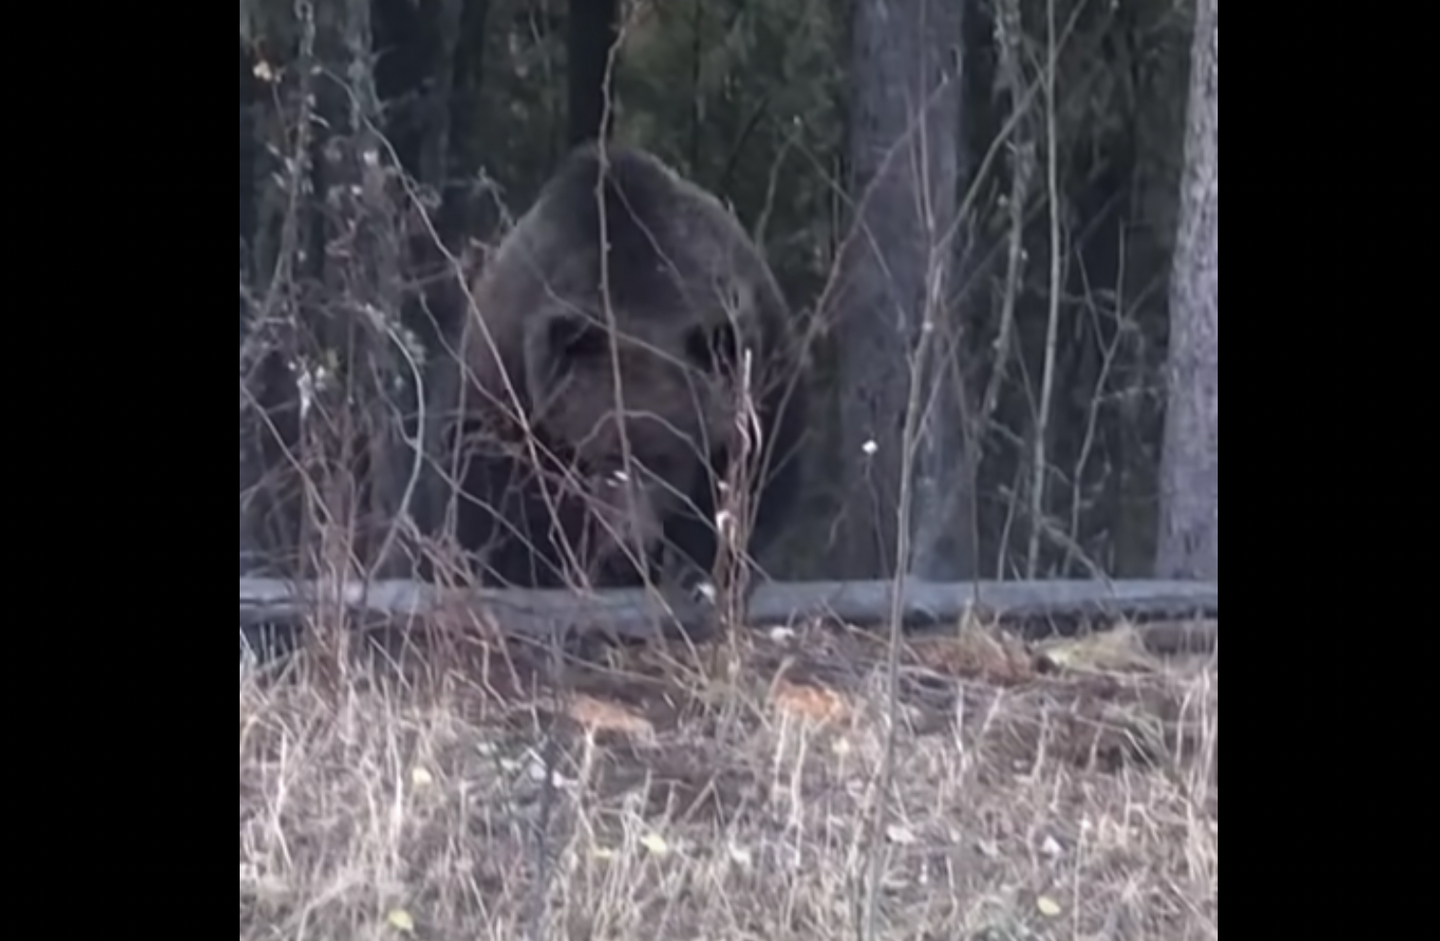 We interviewed a renowned grizzly bear expert about this rare footage of a grizzly preying on black bears. 